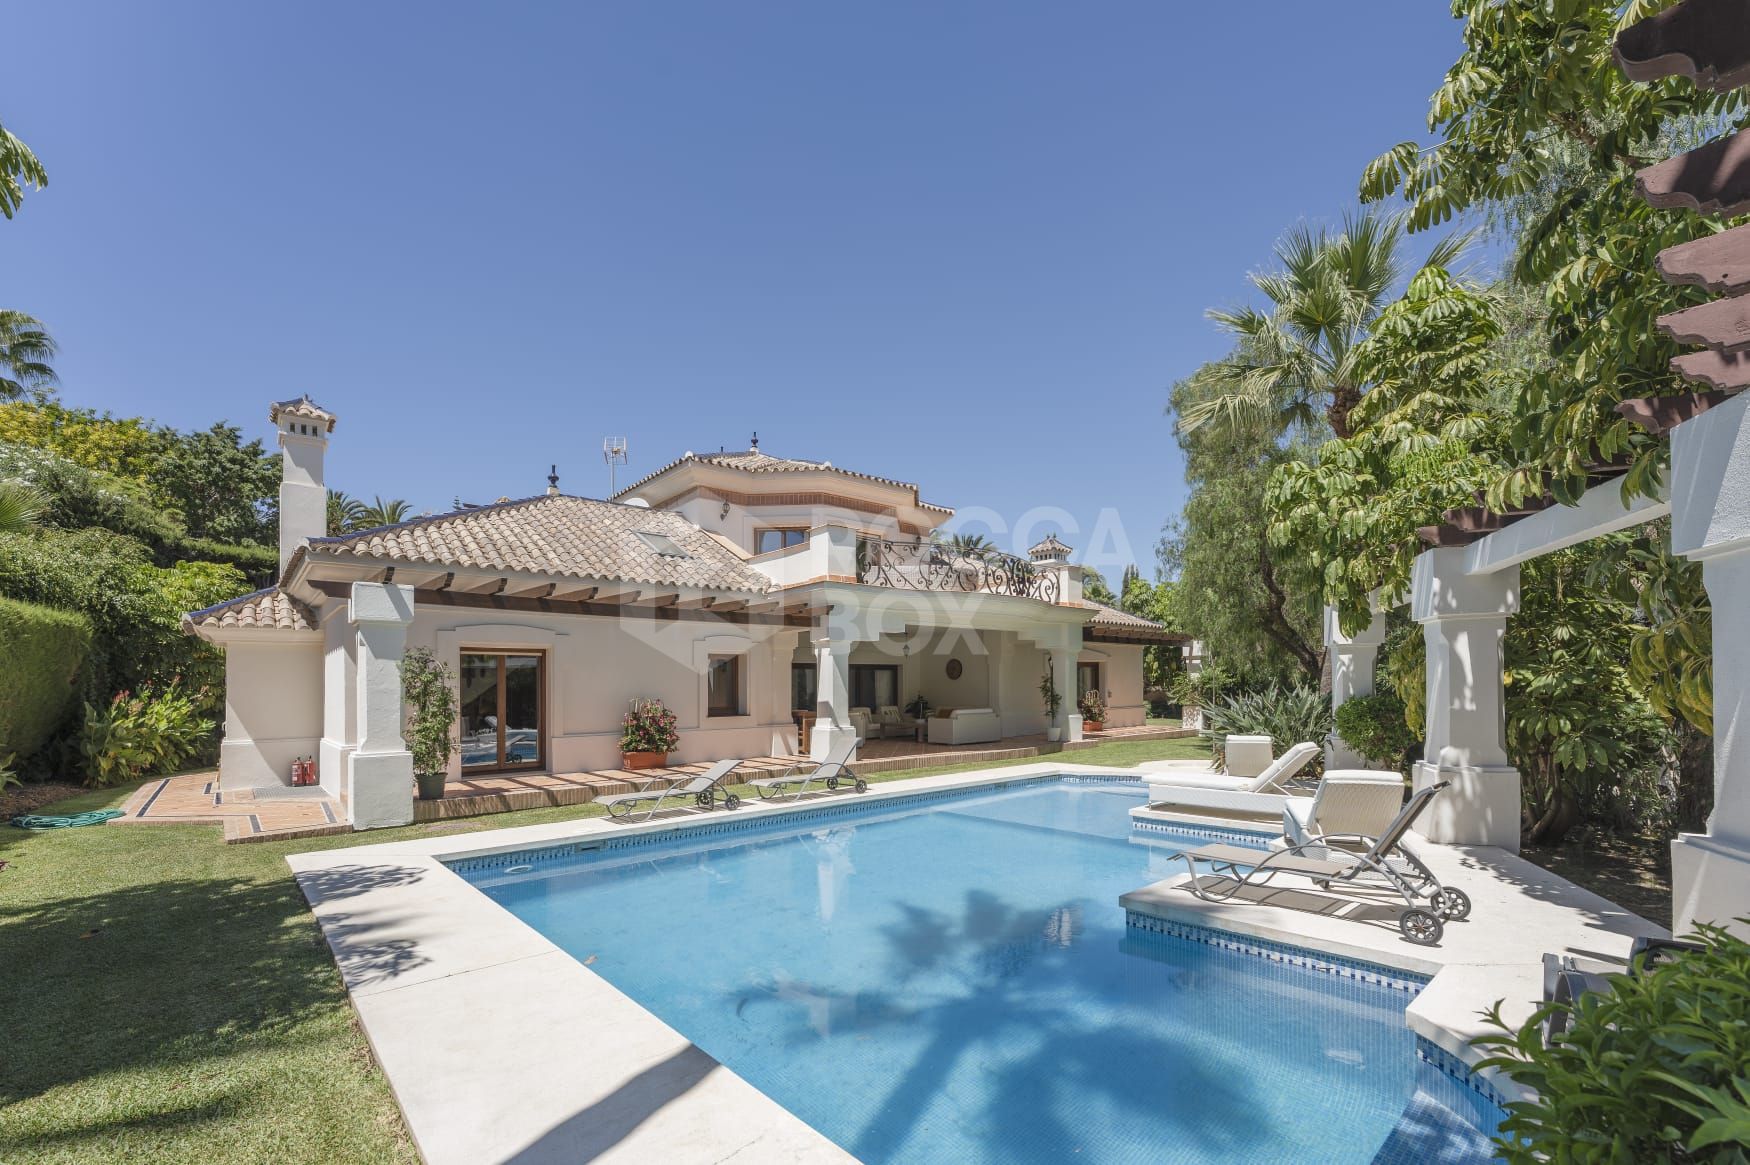 Classic and mediterranean style 6 bedroom villa located in one of the best locations in Nueva Andalucía